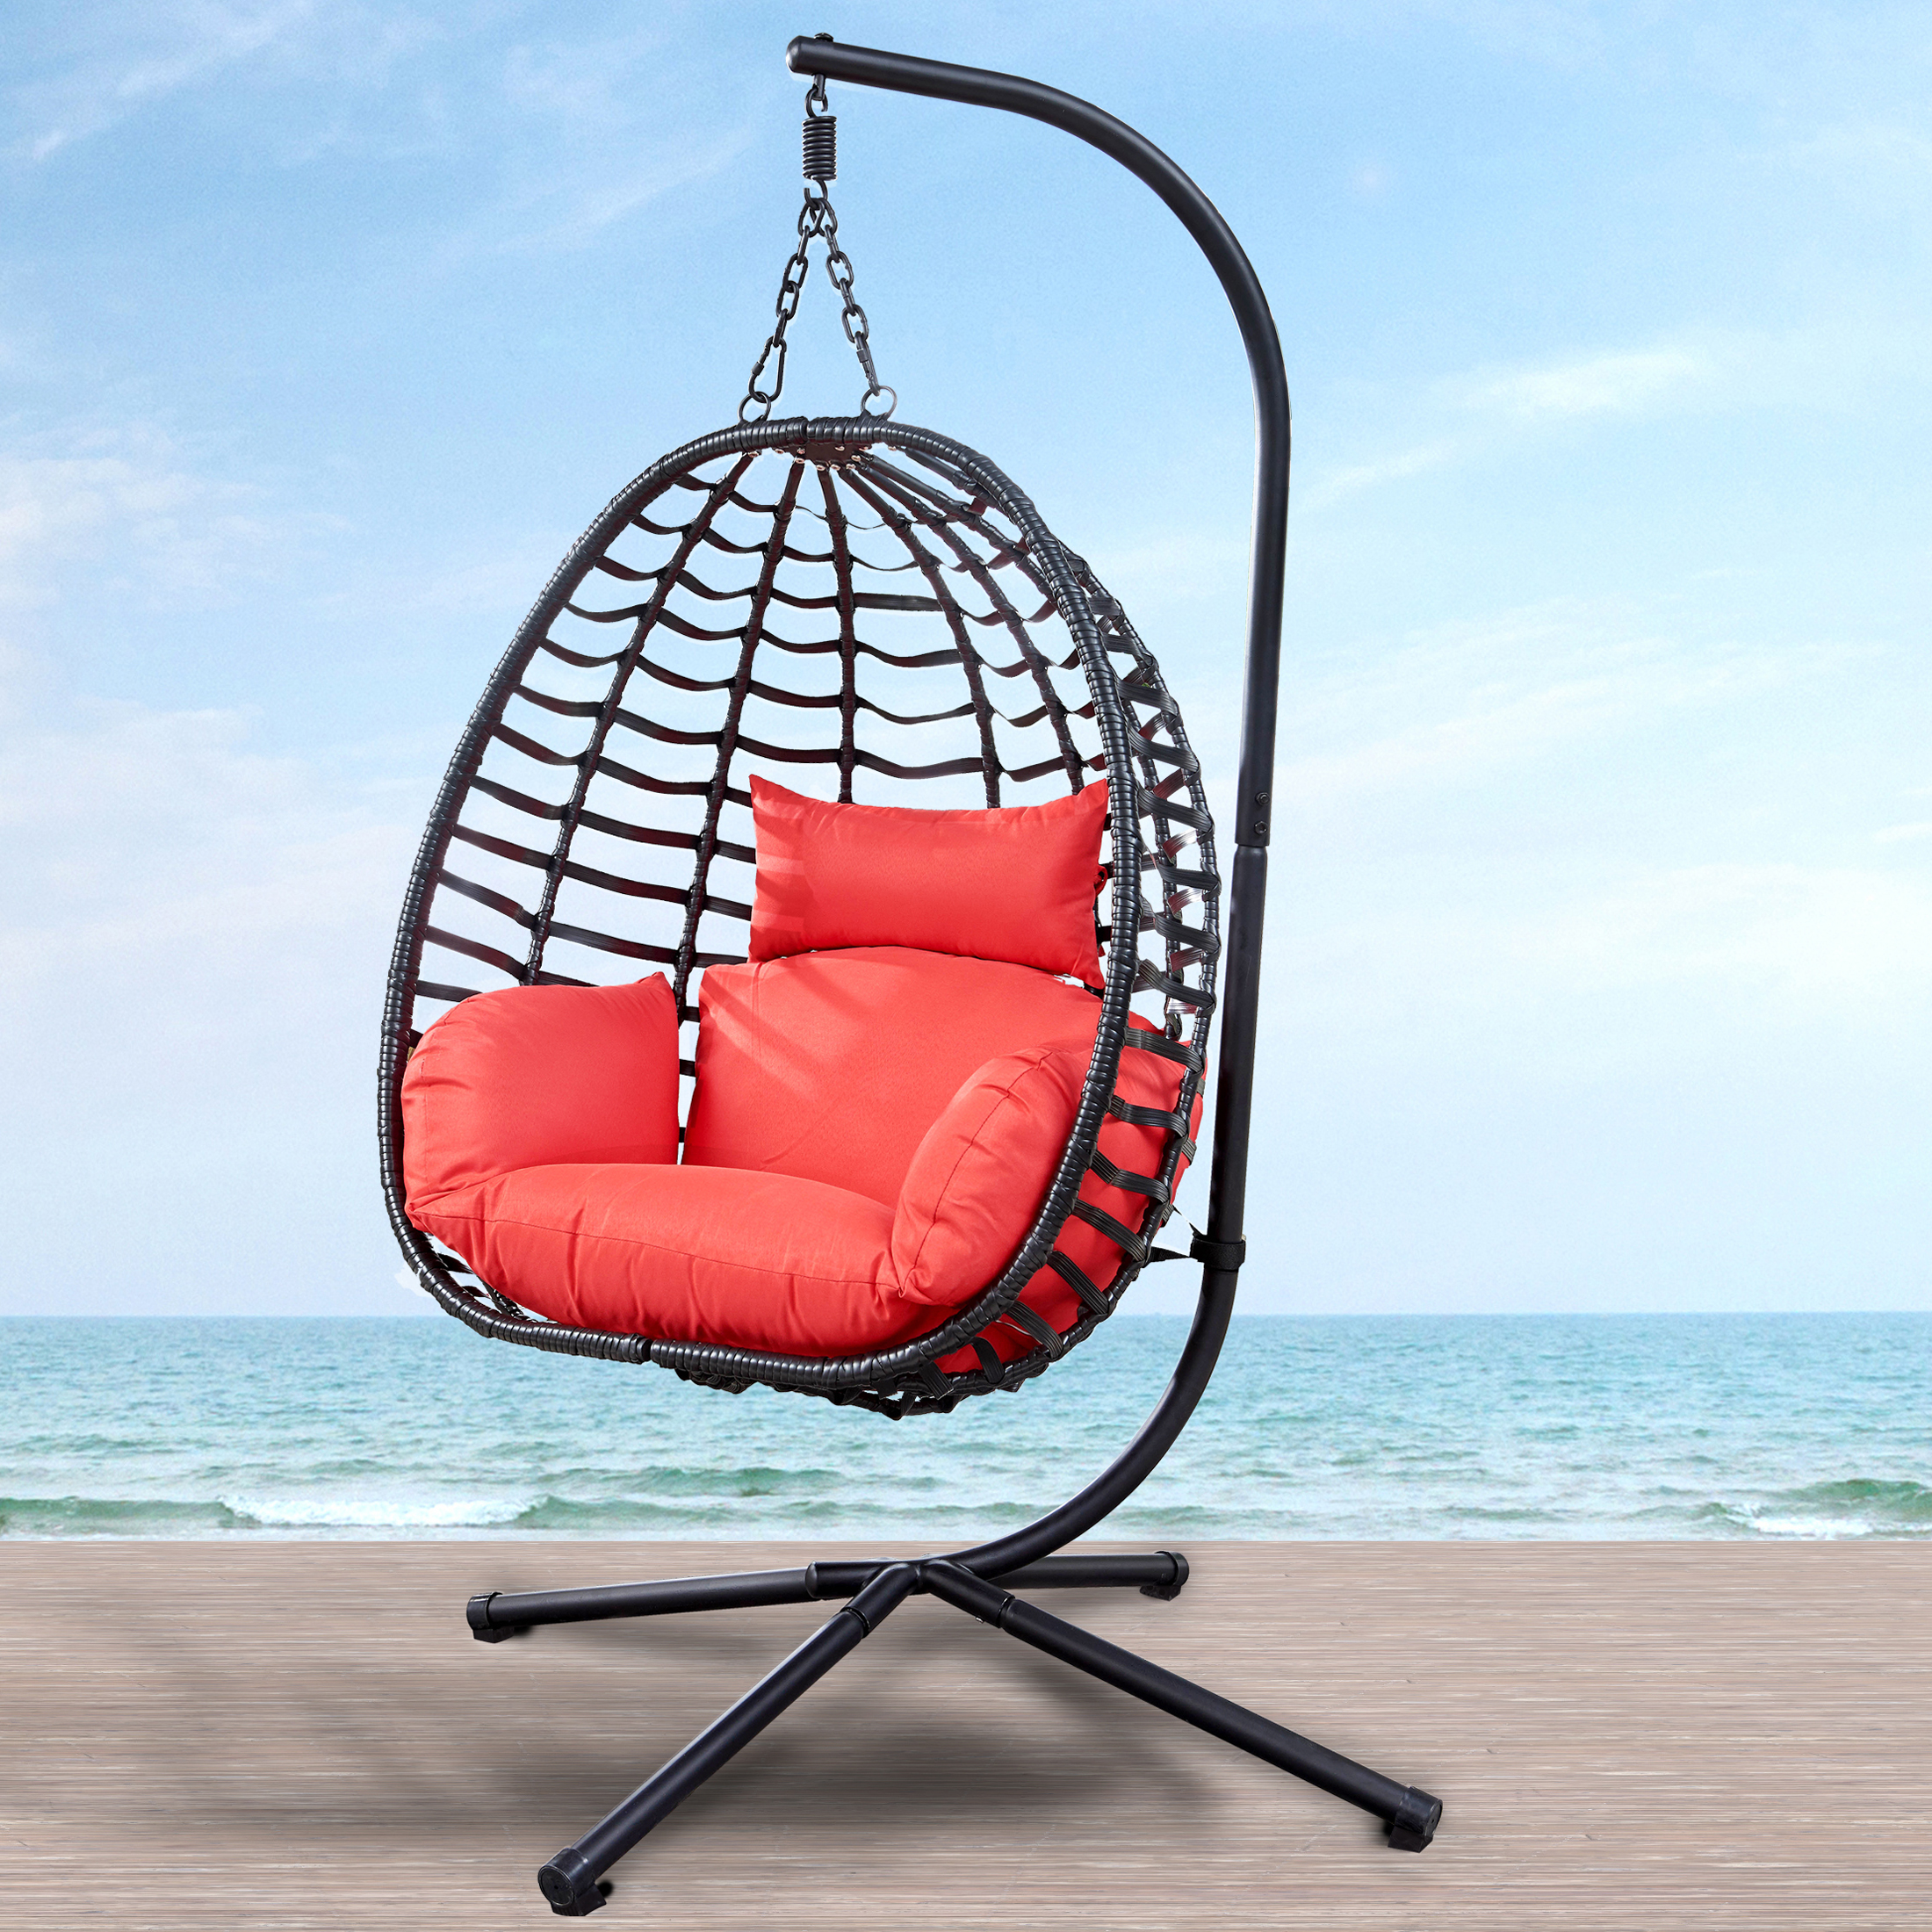 SESSLIFE Patio Egg Chair, Wicker Egg Chair Outdoor Chair, Folding Hanging Egg Chair with Stand and UV Resistant Cushion, Red Basket Chair Egg Swing Chair, TE3134 - image 1 of 6